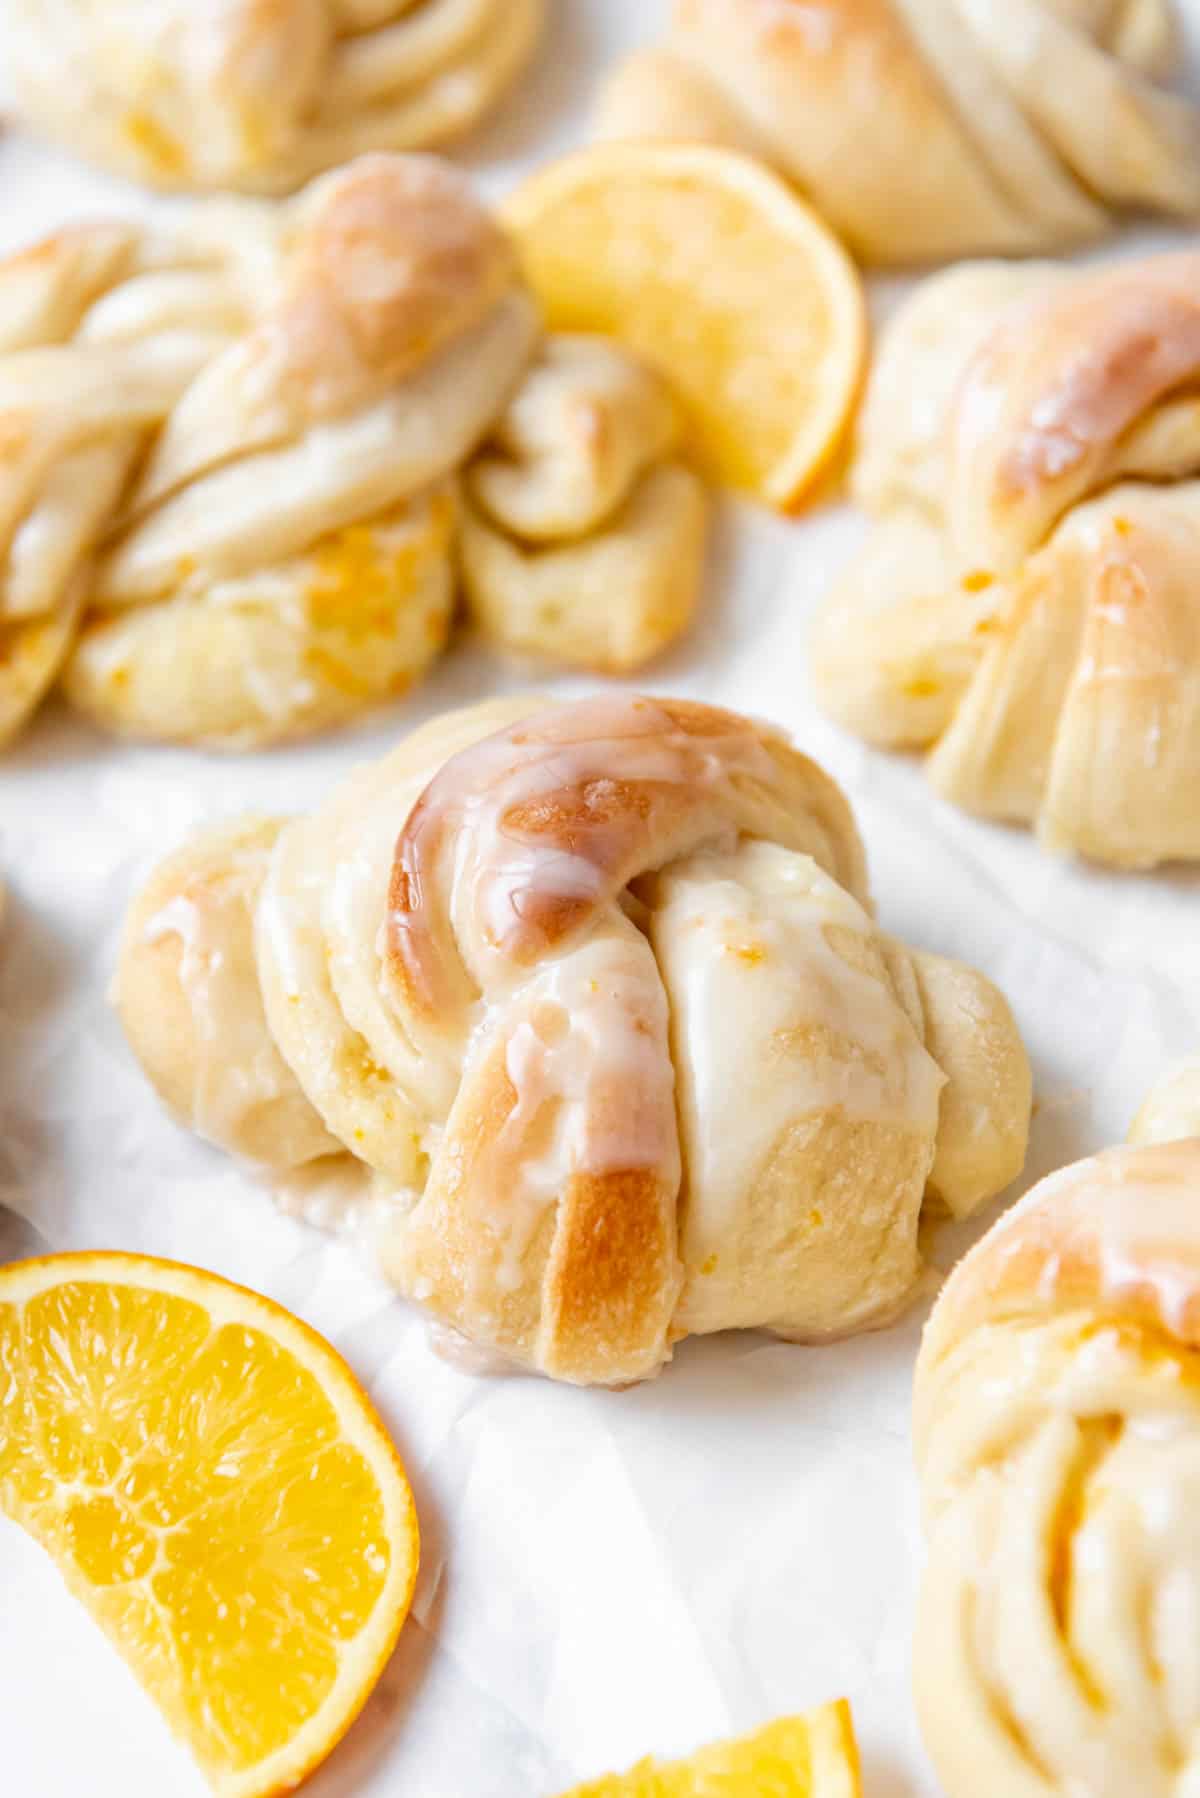 An image of knotted orange sweet rolls next to orange slices.